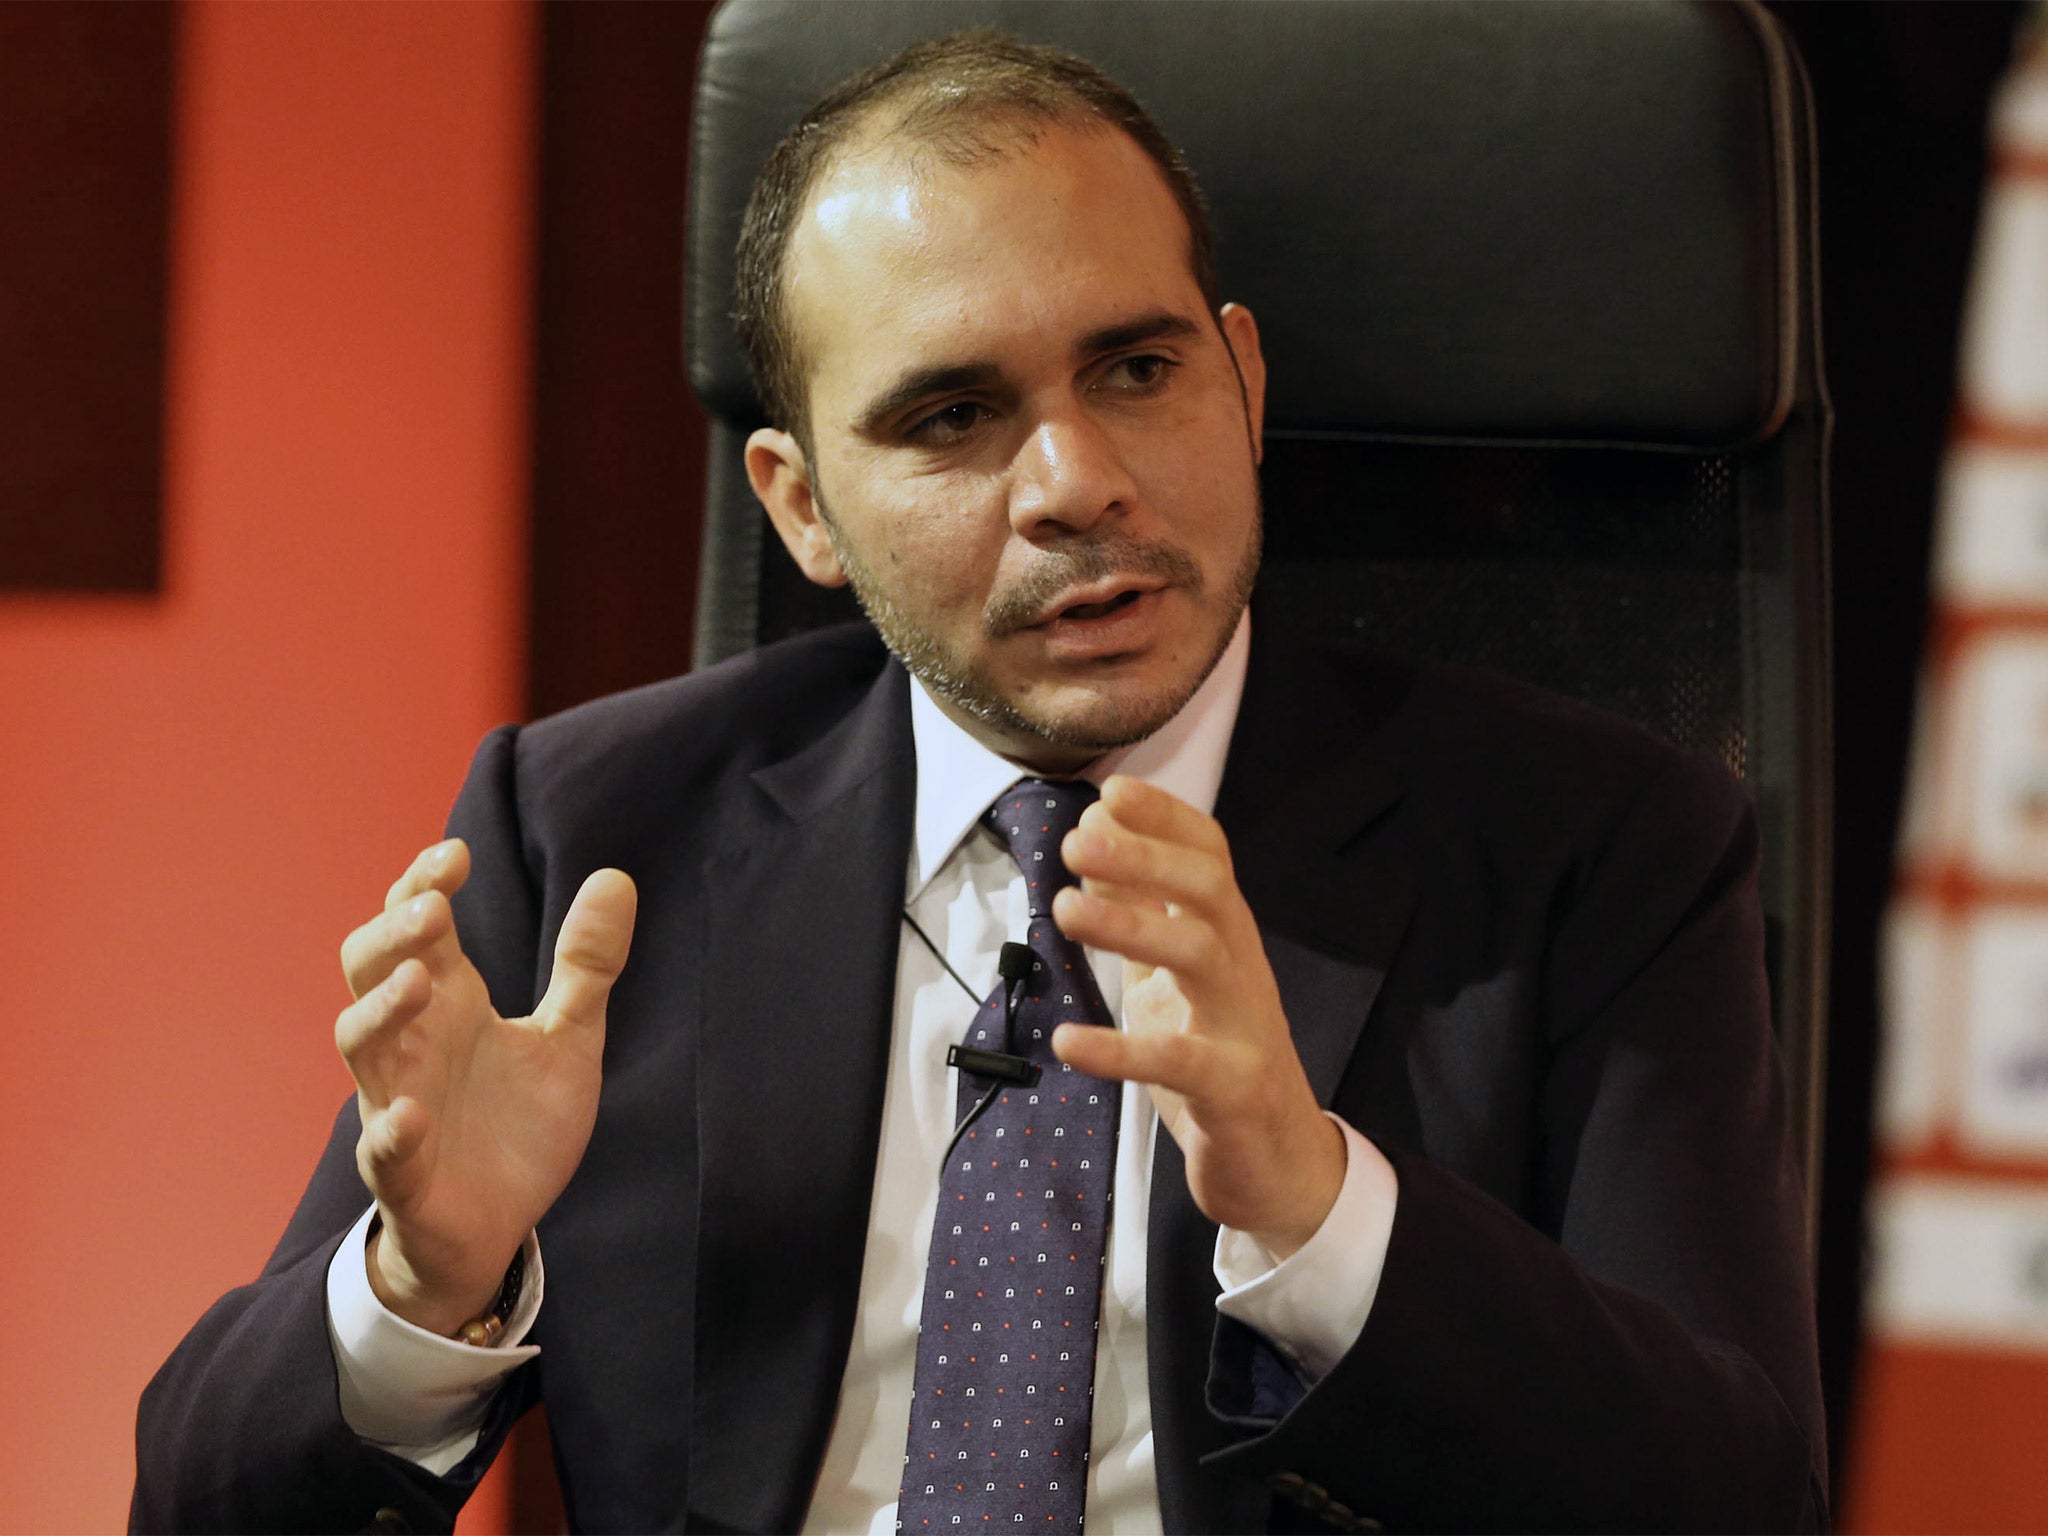 Prince Ali bin al-Hussein is the sole challenger to Sepp Blatter in Fifa’s election